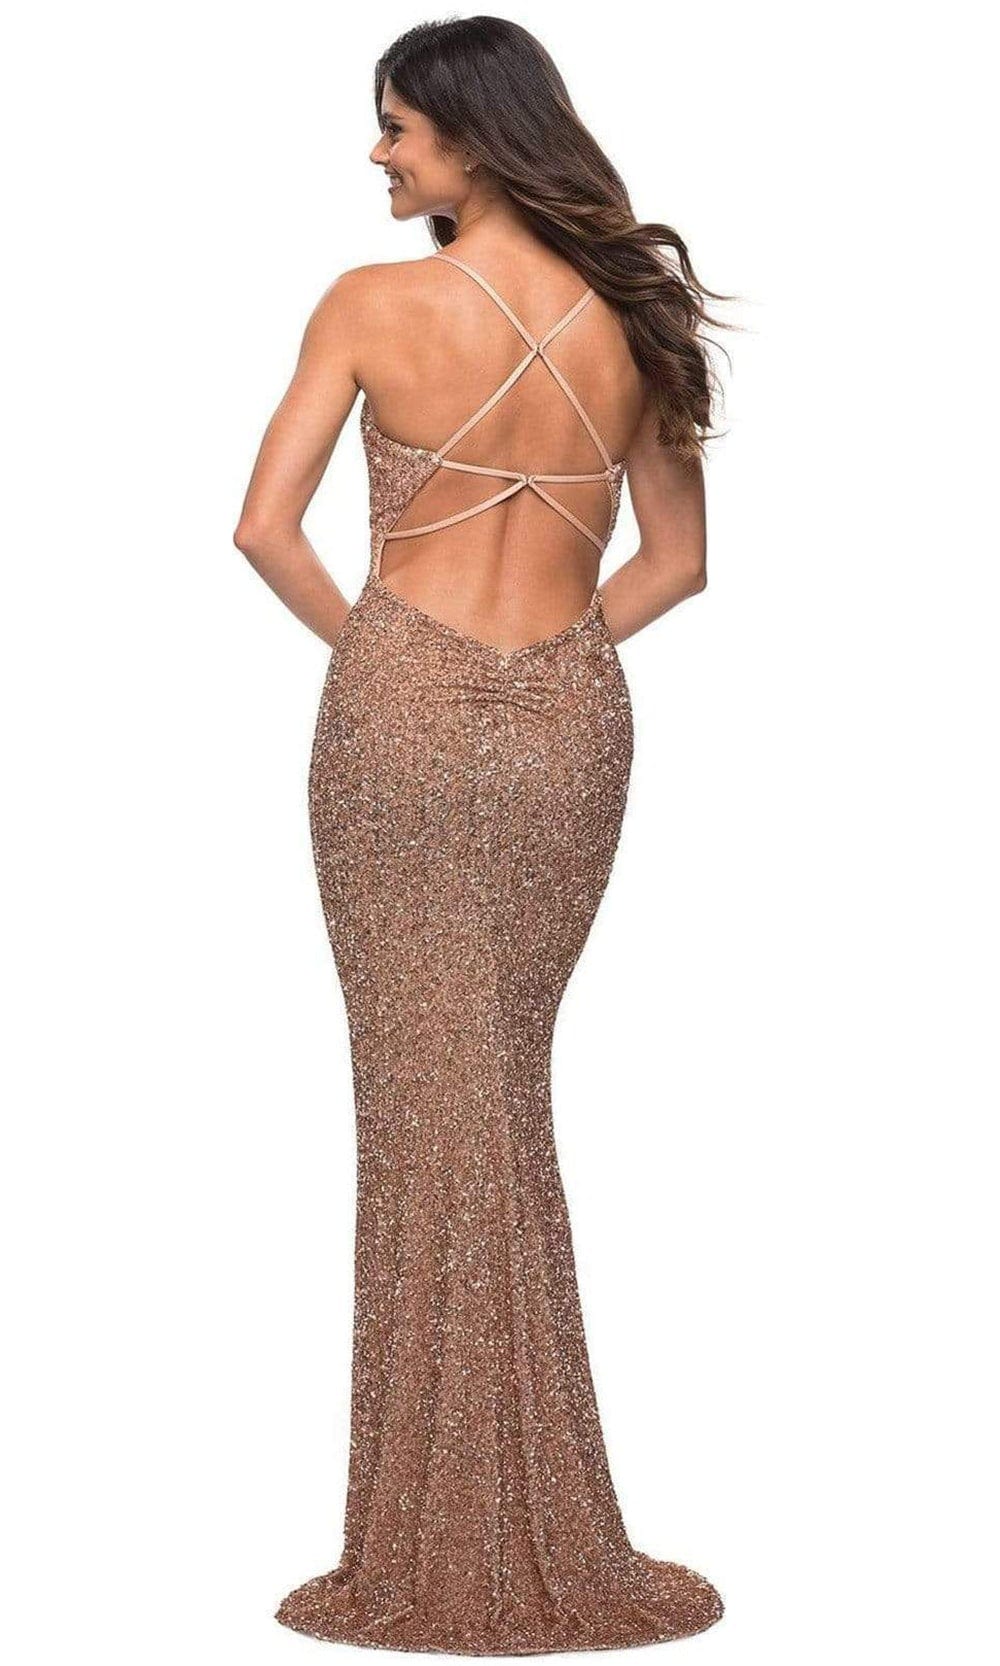 La Femme - 29949 Strappy Back Sequin Gown Prom Dresses